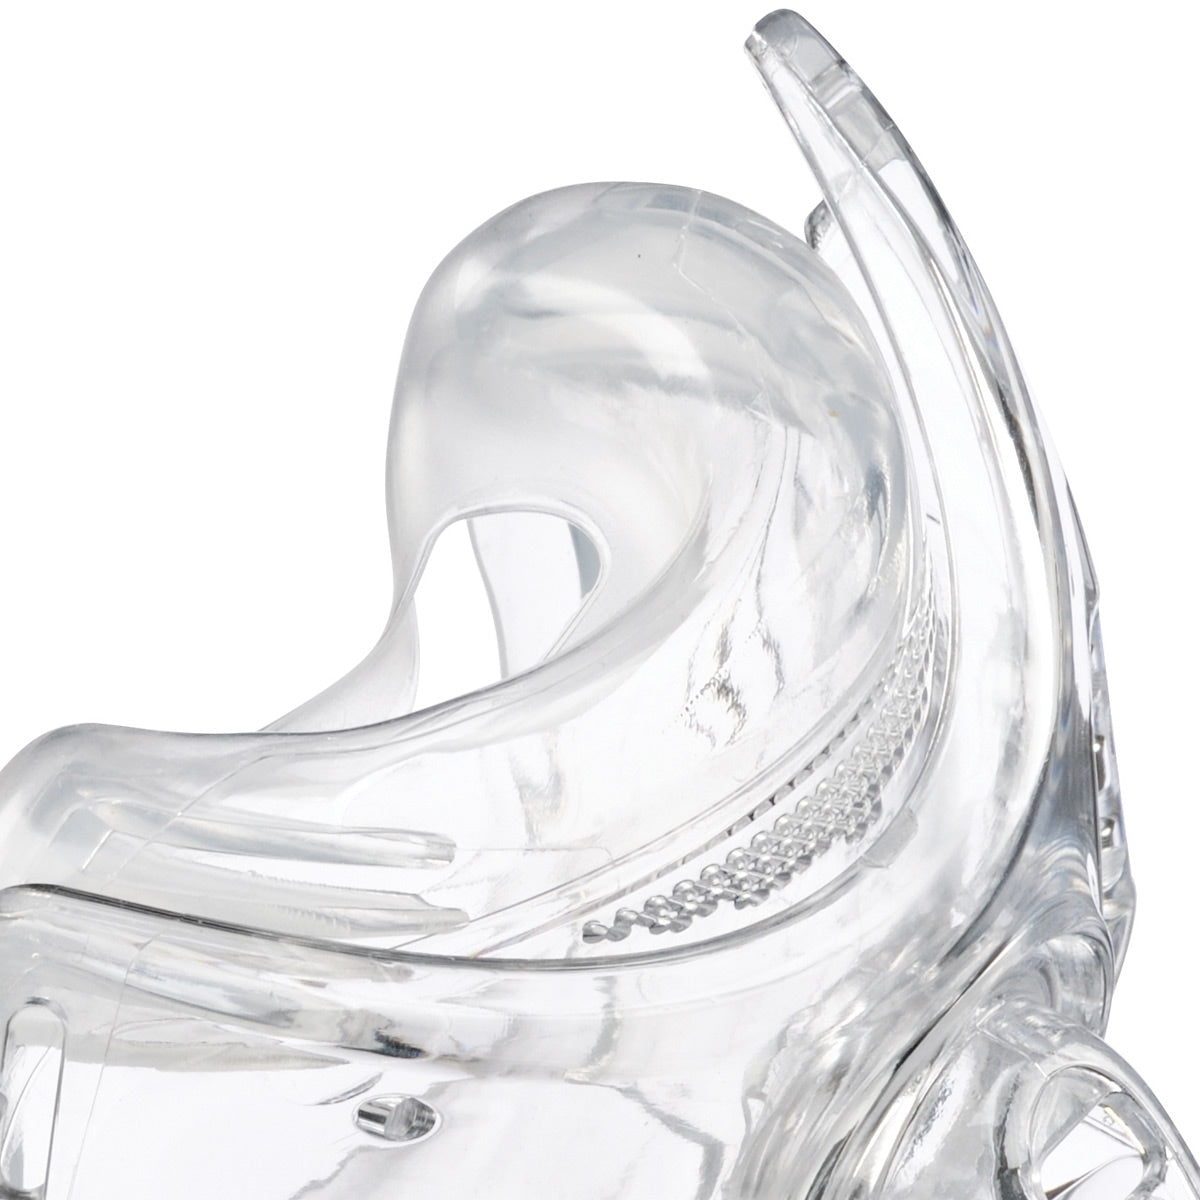 Amara View Full Face CPAP/BiPAP Mask FitPack with Headgear